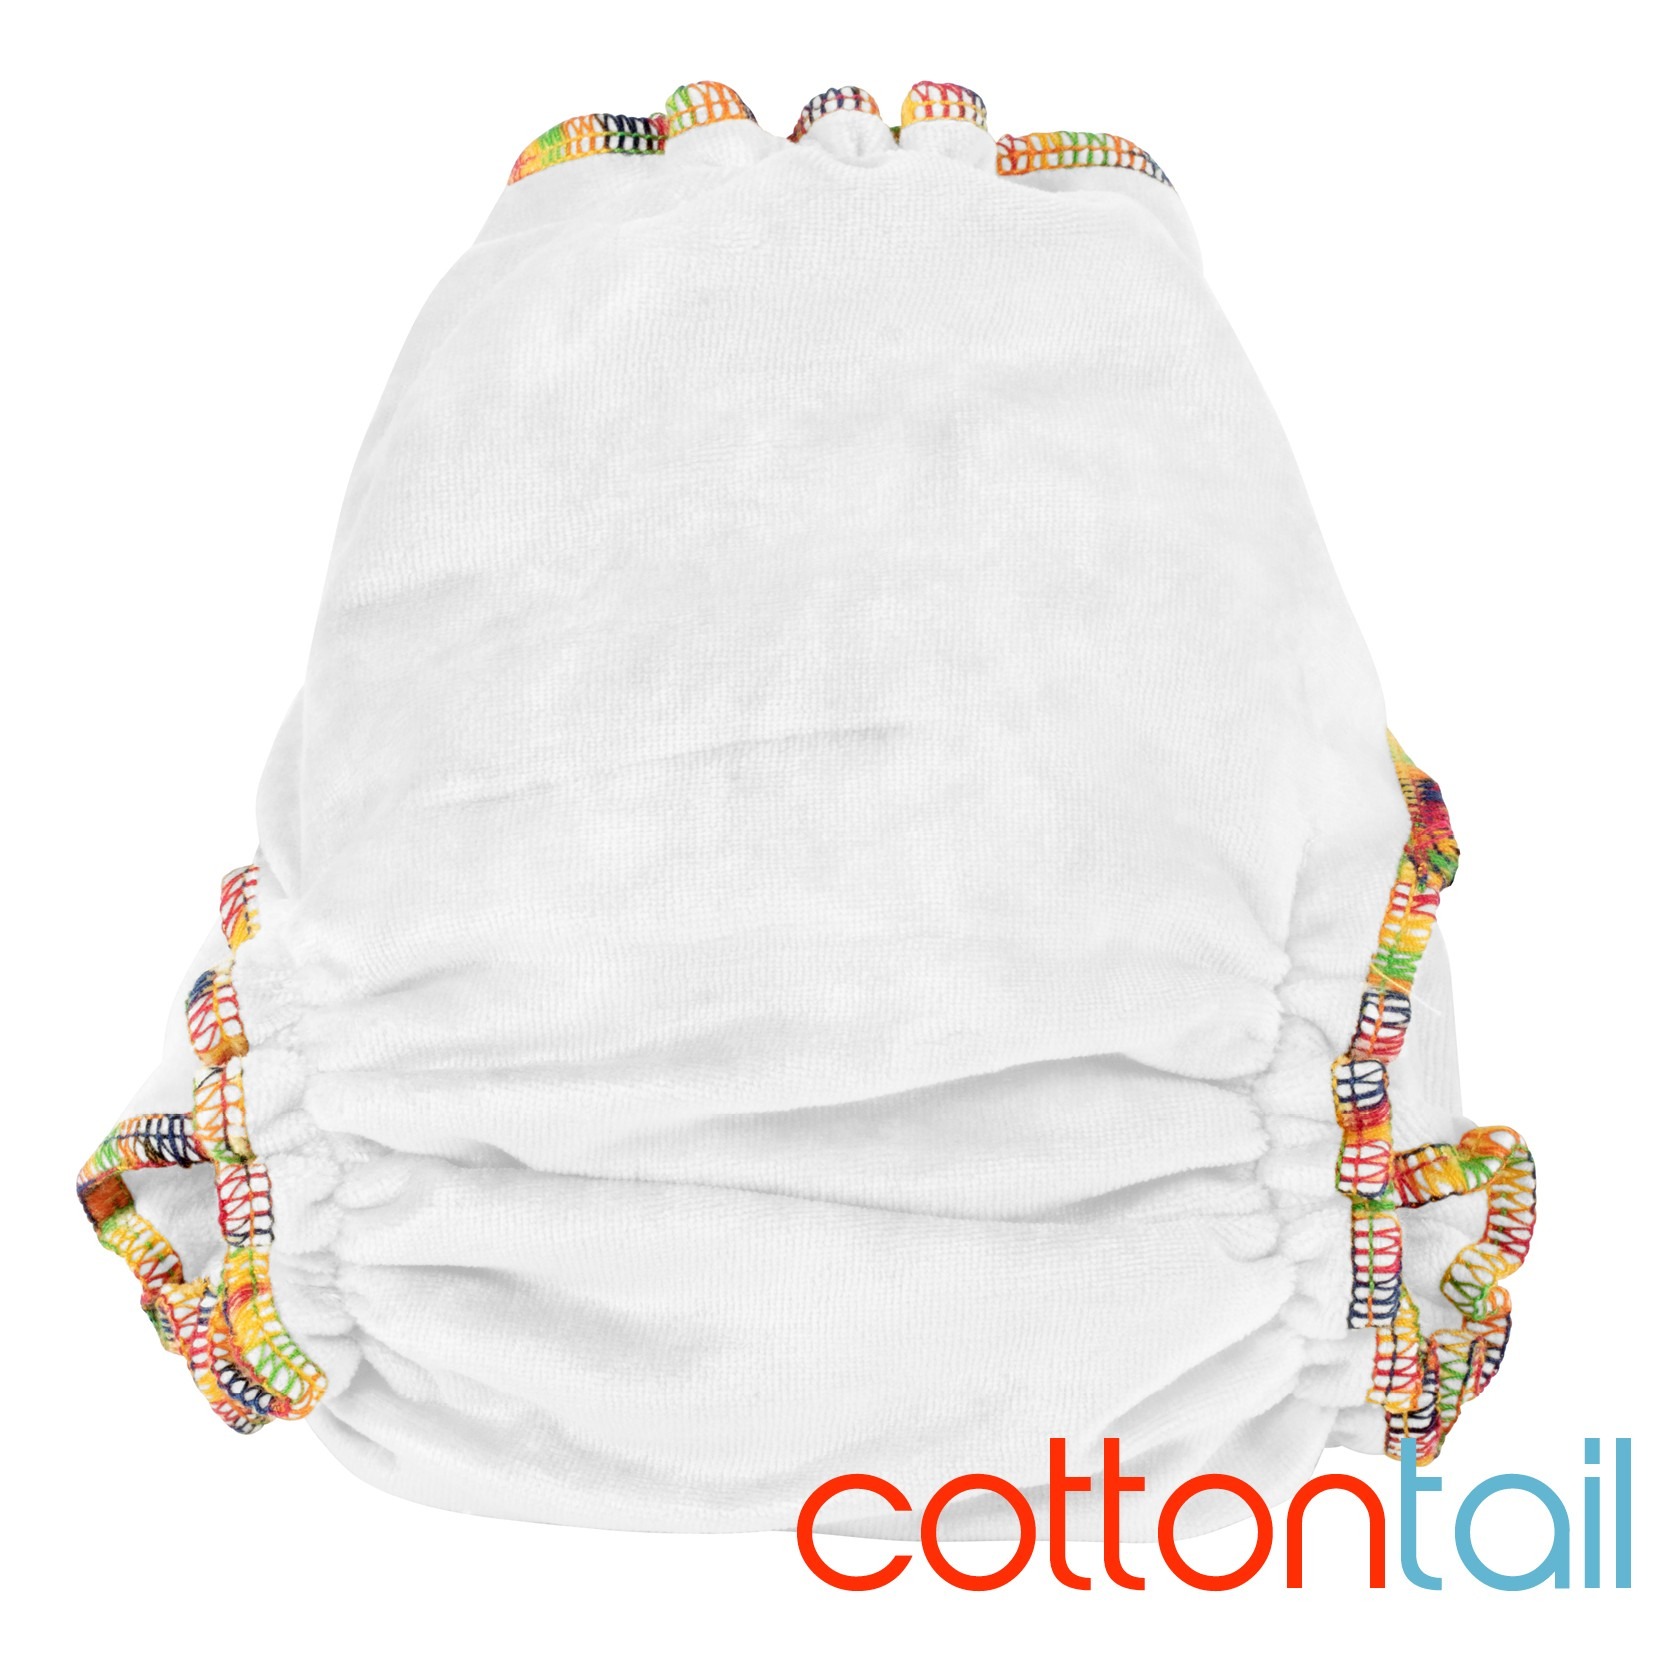 Bubblebubs bamboo delights Cottontail